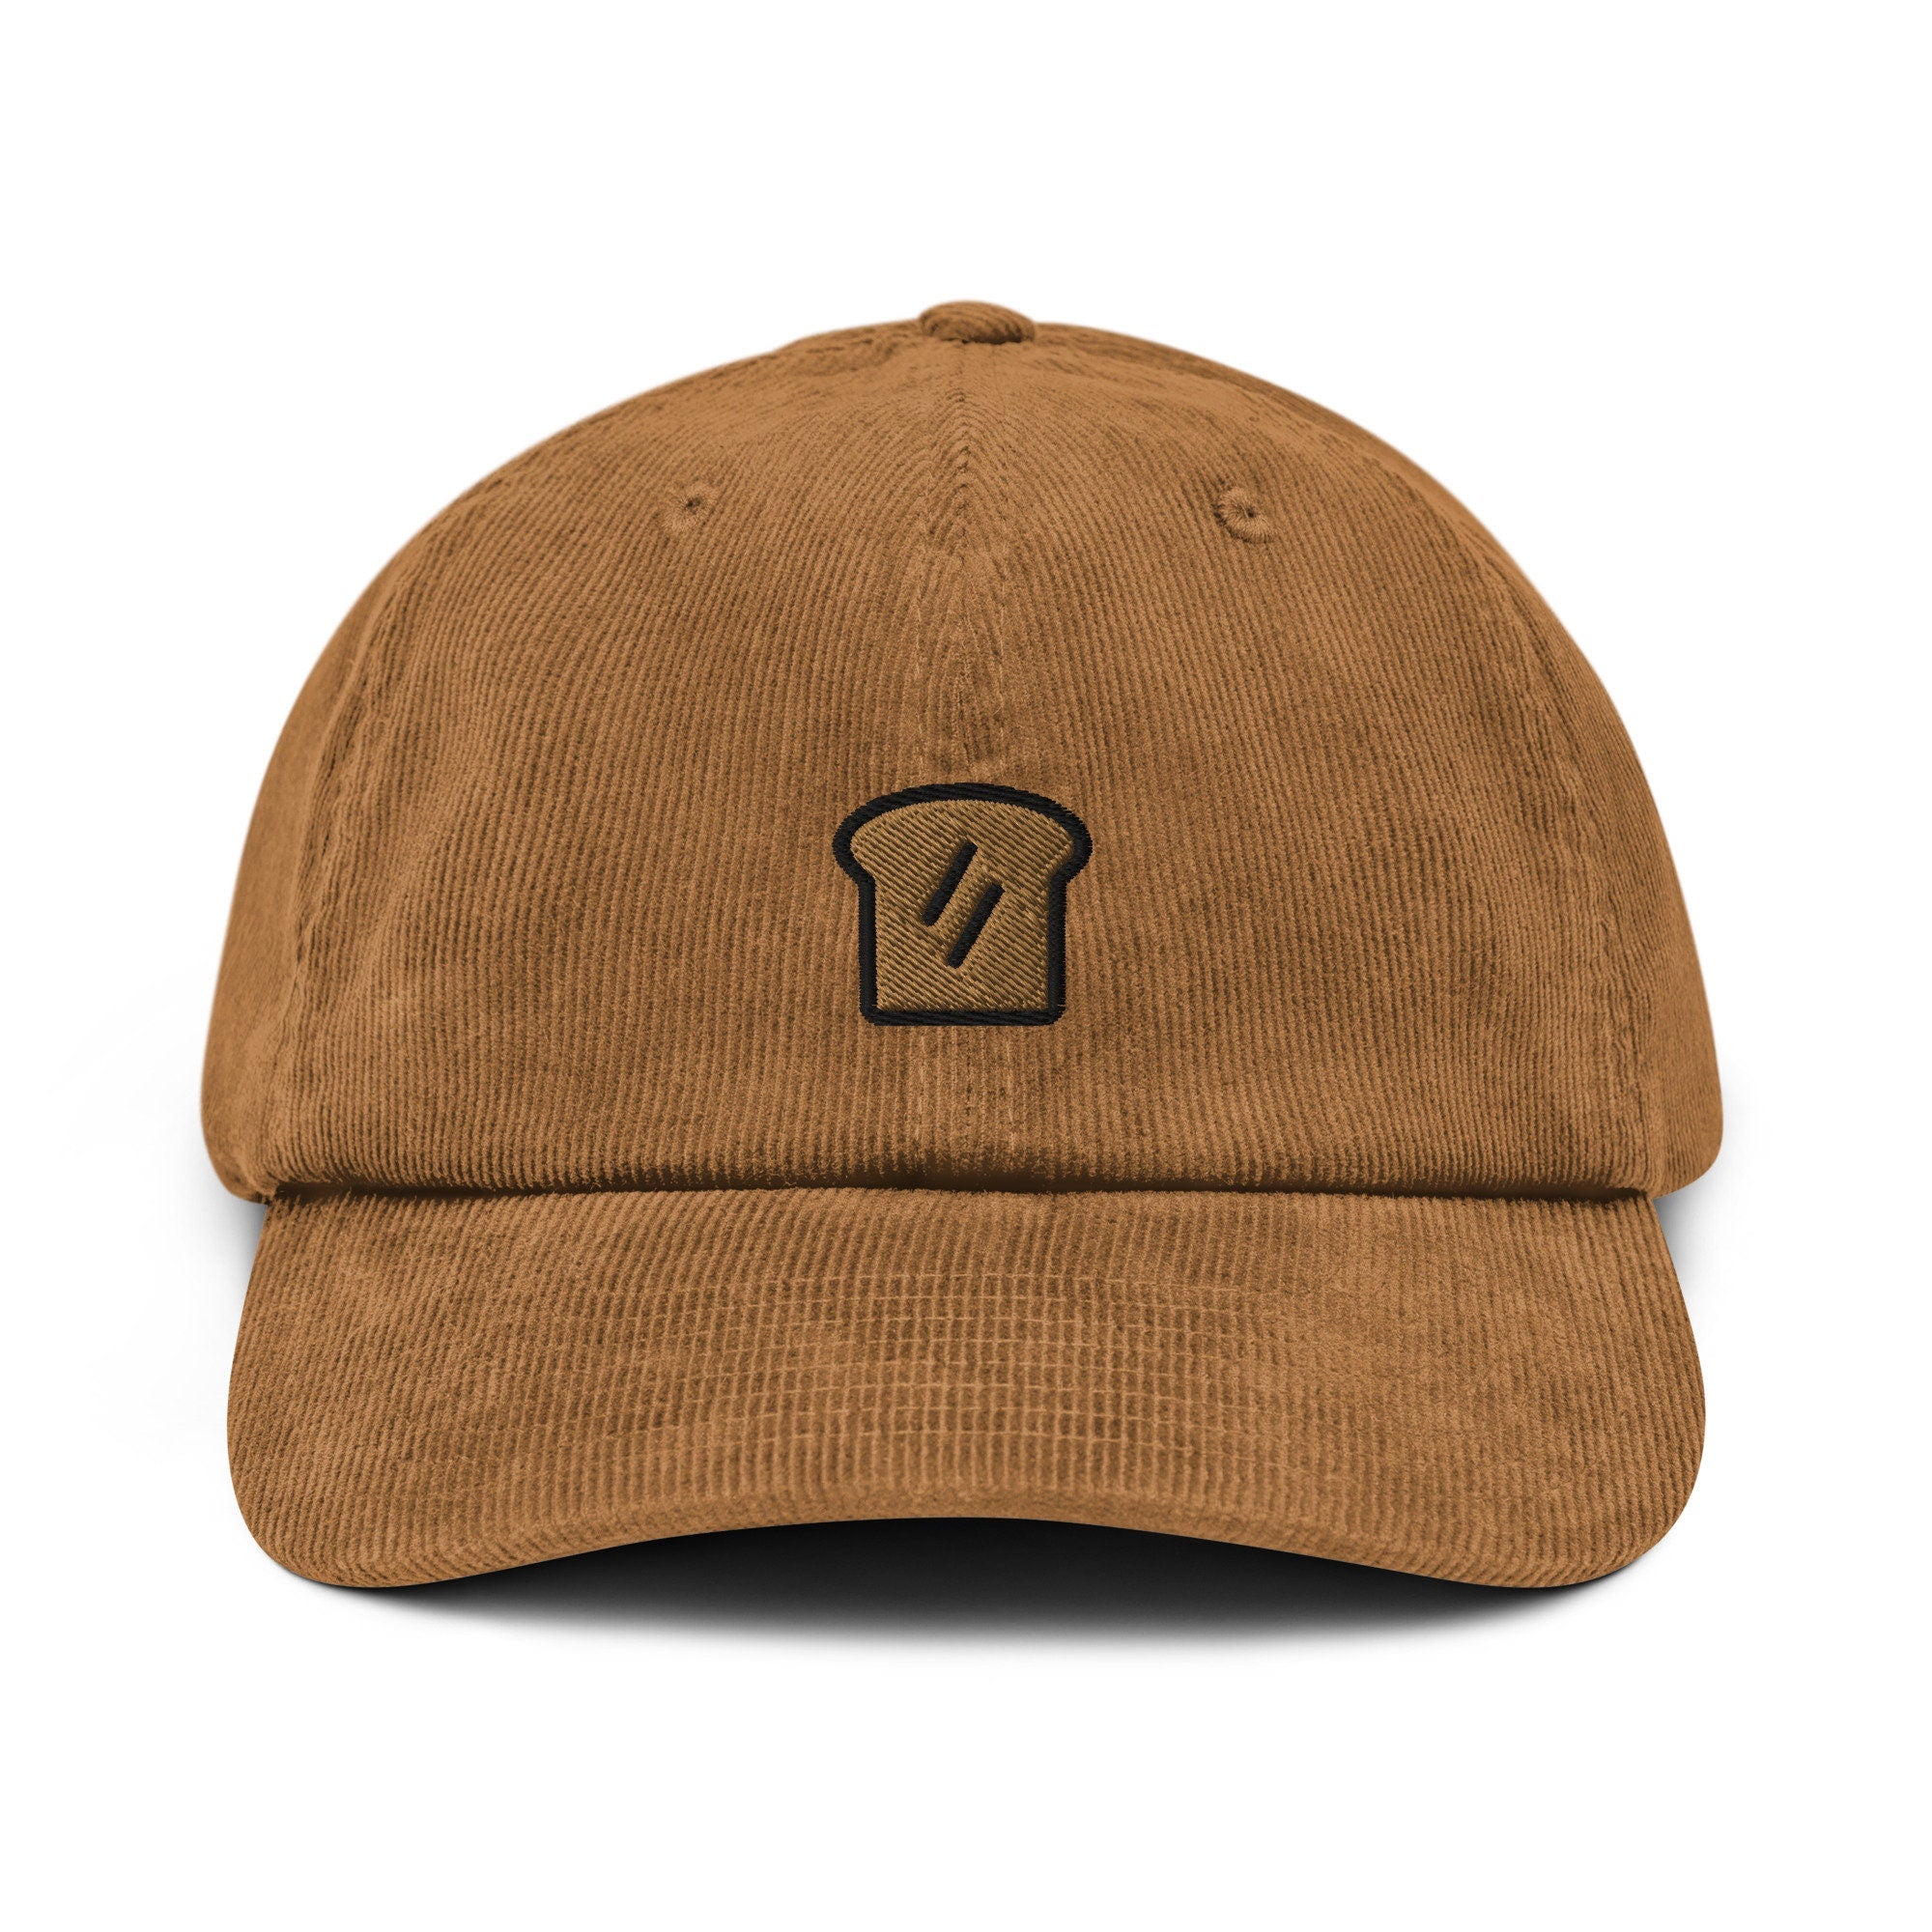 Toast Corduroy Hat, Handmade Embroidered Corduroy Dad Cap - Multiple Colors